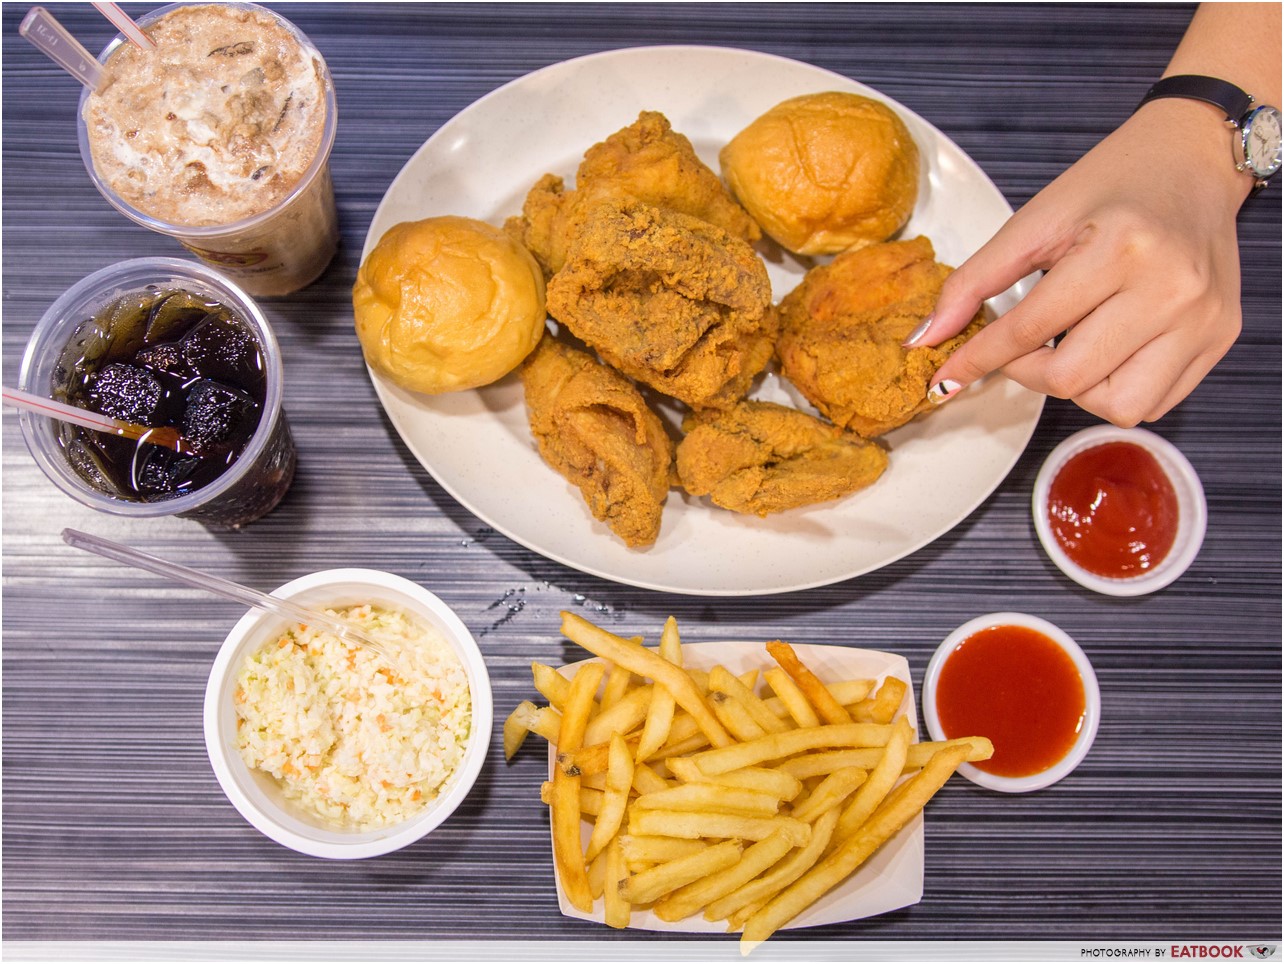 Arnold's fried chicken - 2 person combo